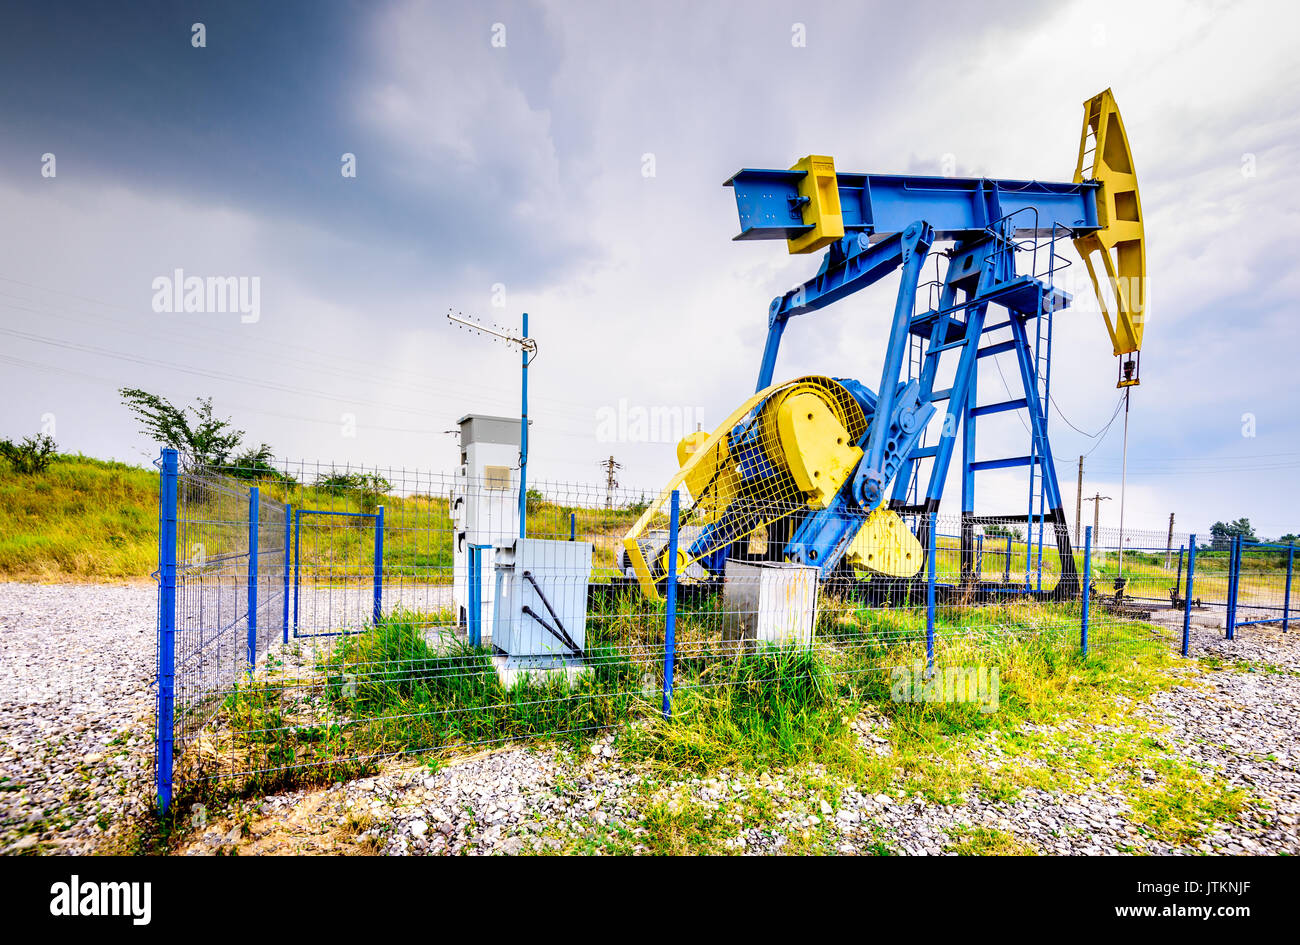 Extraction oil pumps with electrical PLC cabinet. Oil and gas industry landscape. Stock Photo